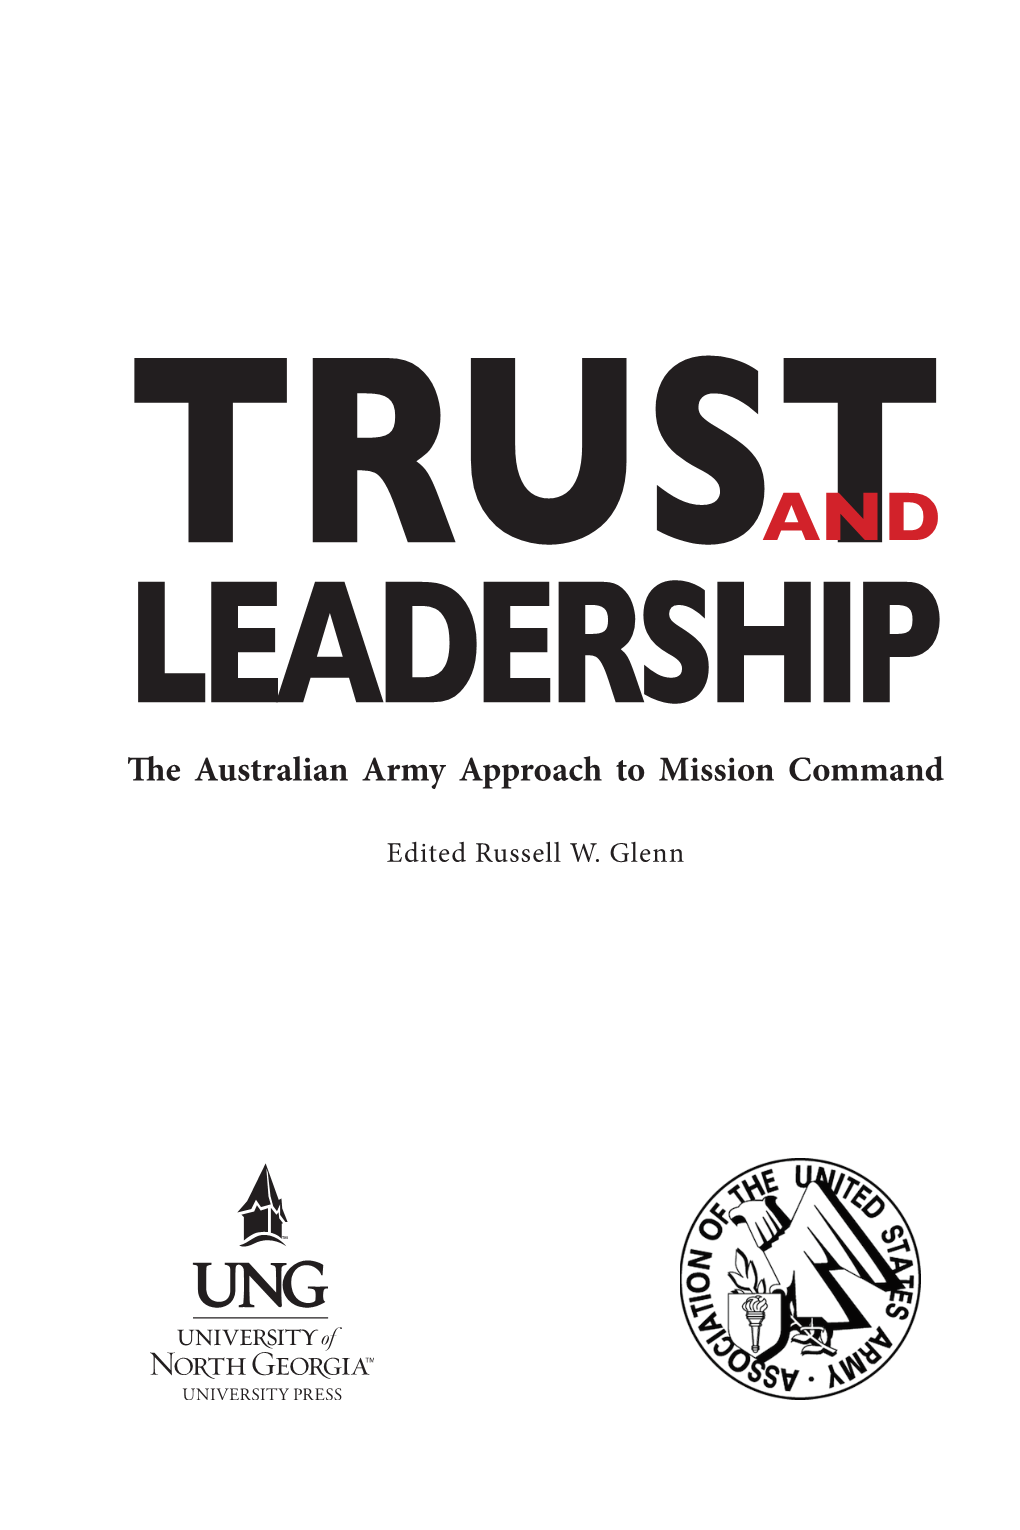 The Australian Army Approach to Mission Command